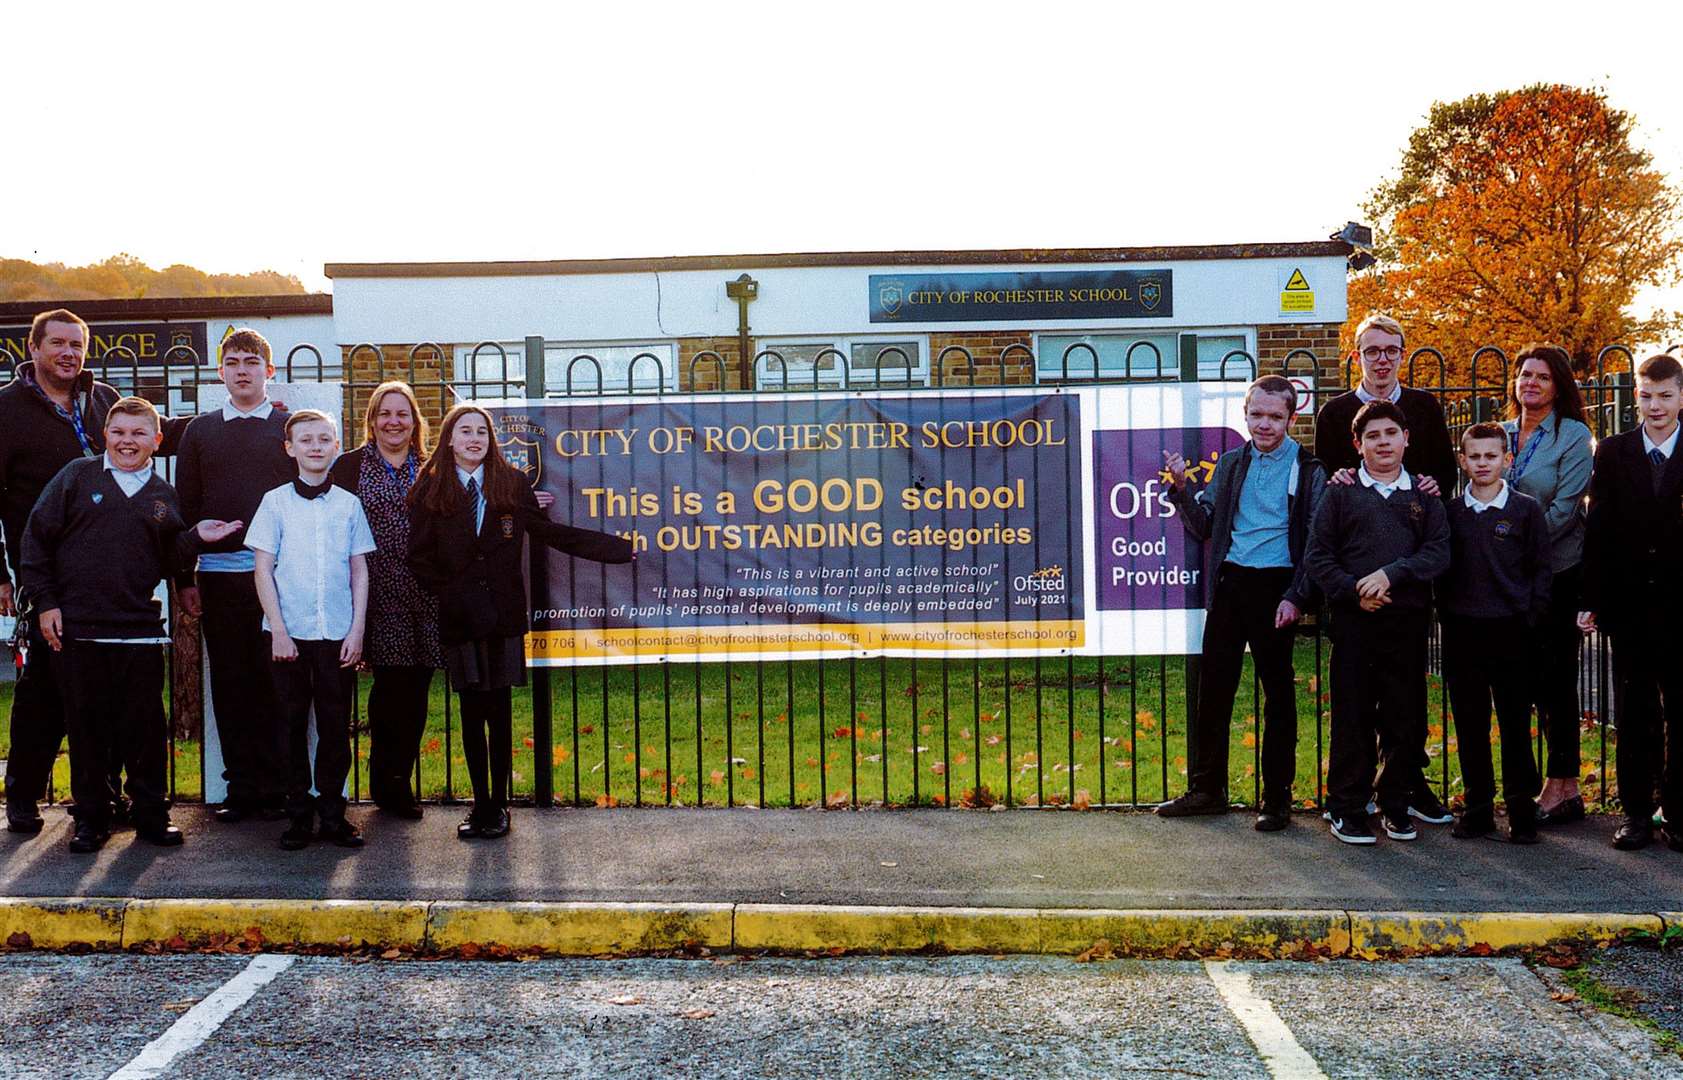 The City of Rochester School was rated as ‘Good’ by Ofsted following its last inspection two years ago